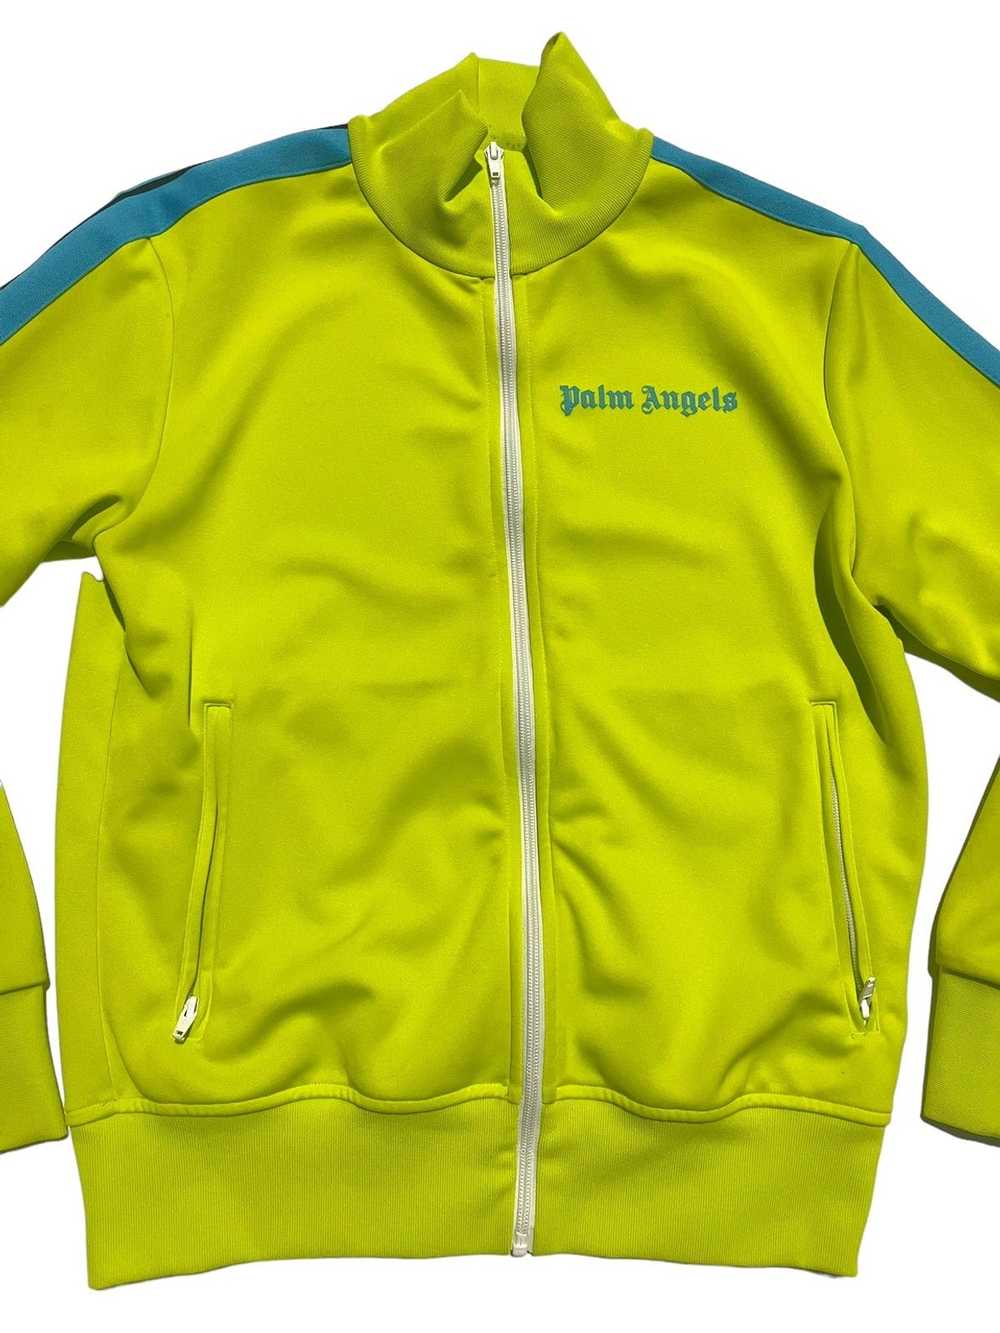 Palm Angels Palm Angels Track Jacket Neon - image 3